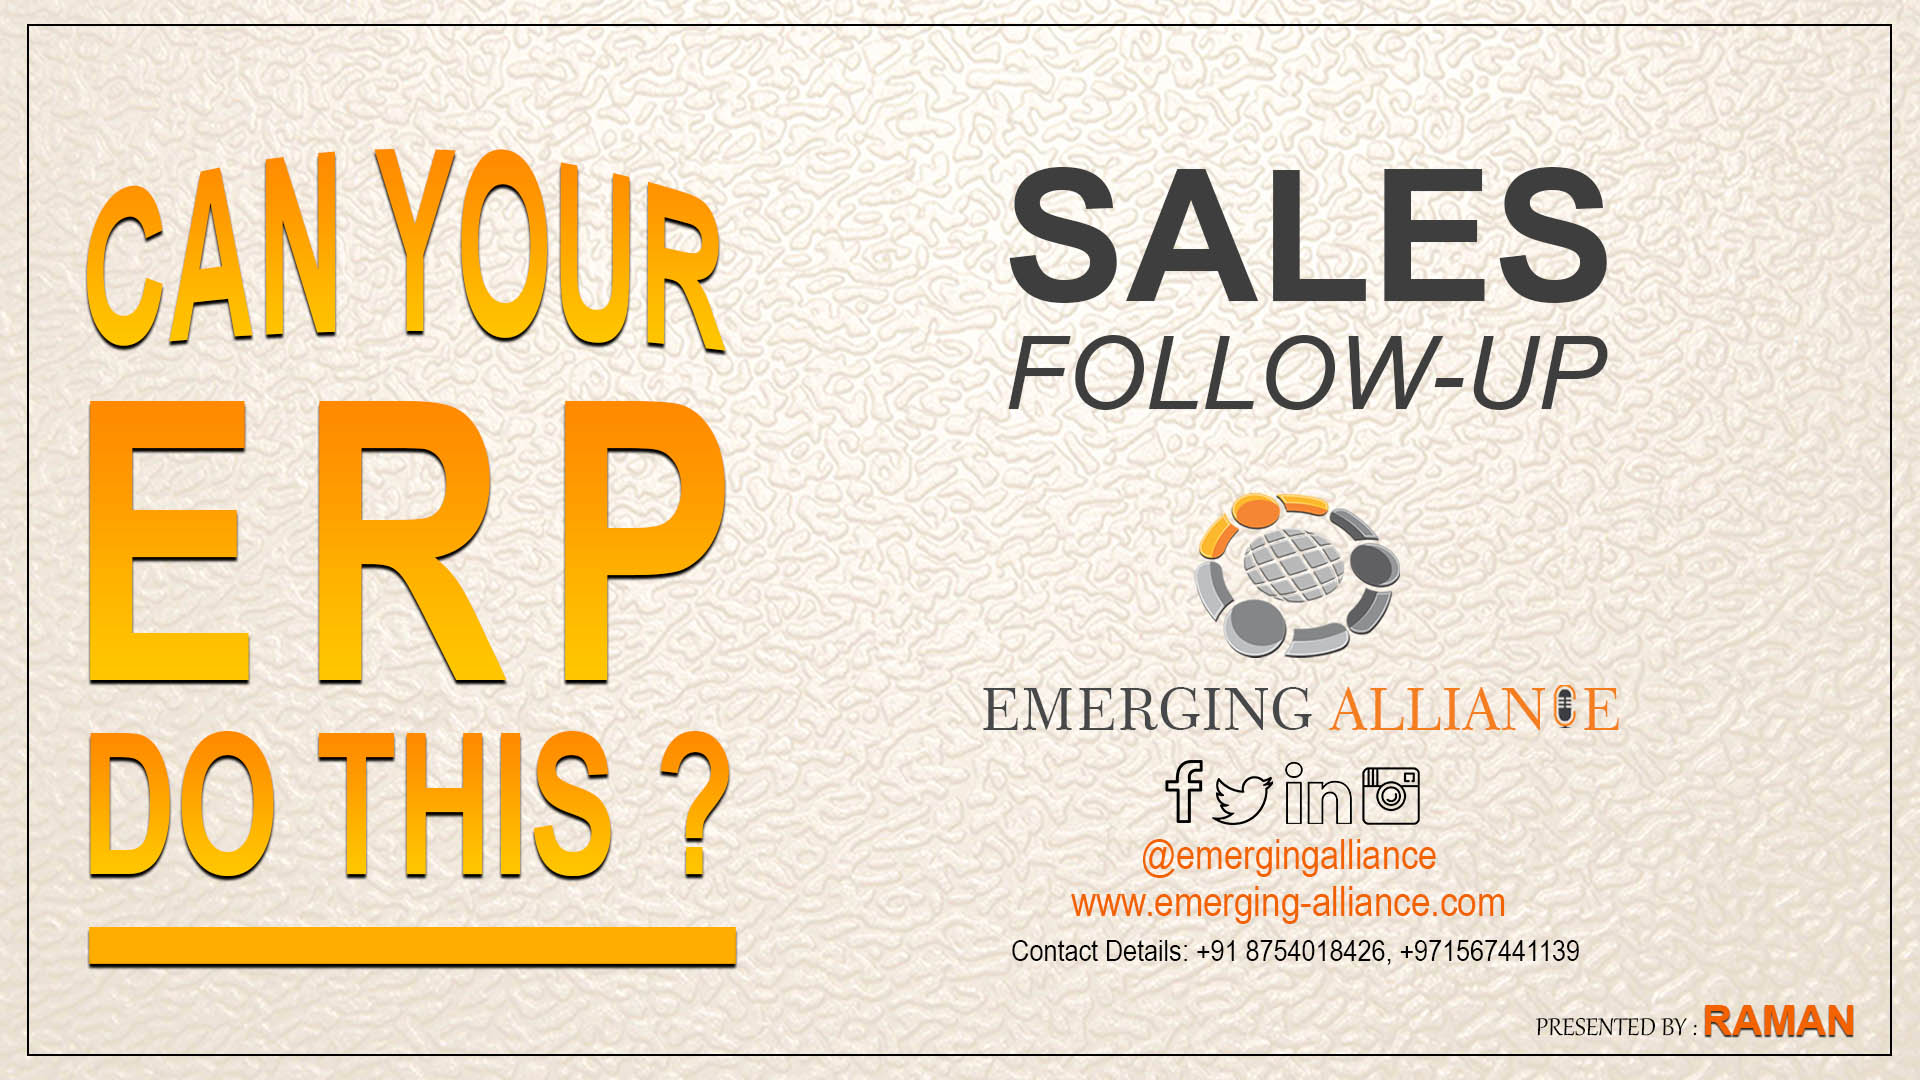 sales follow up with erp software